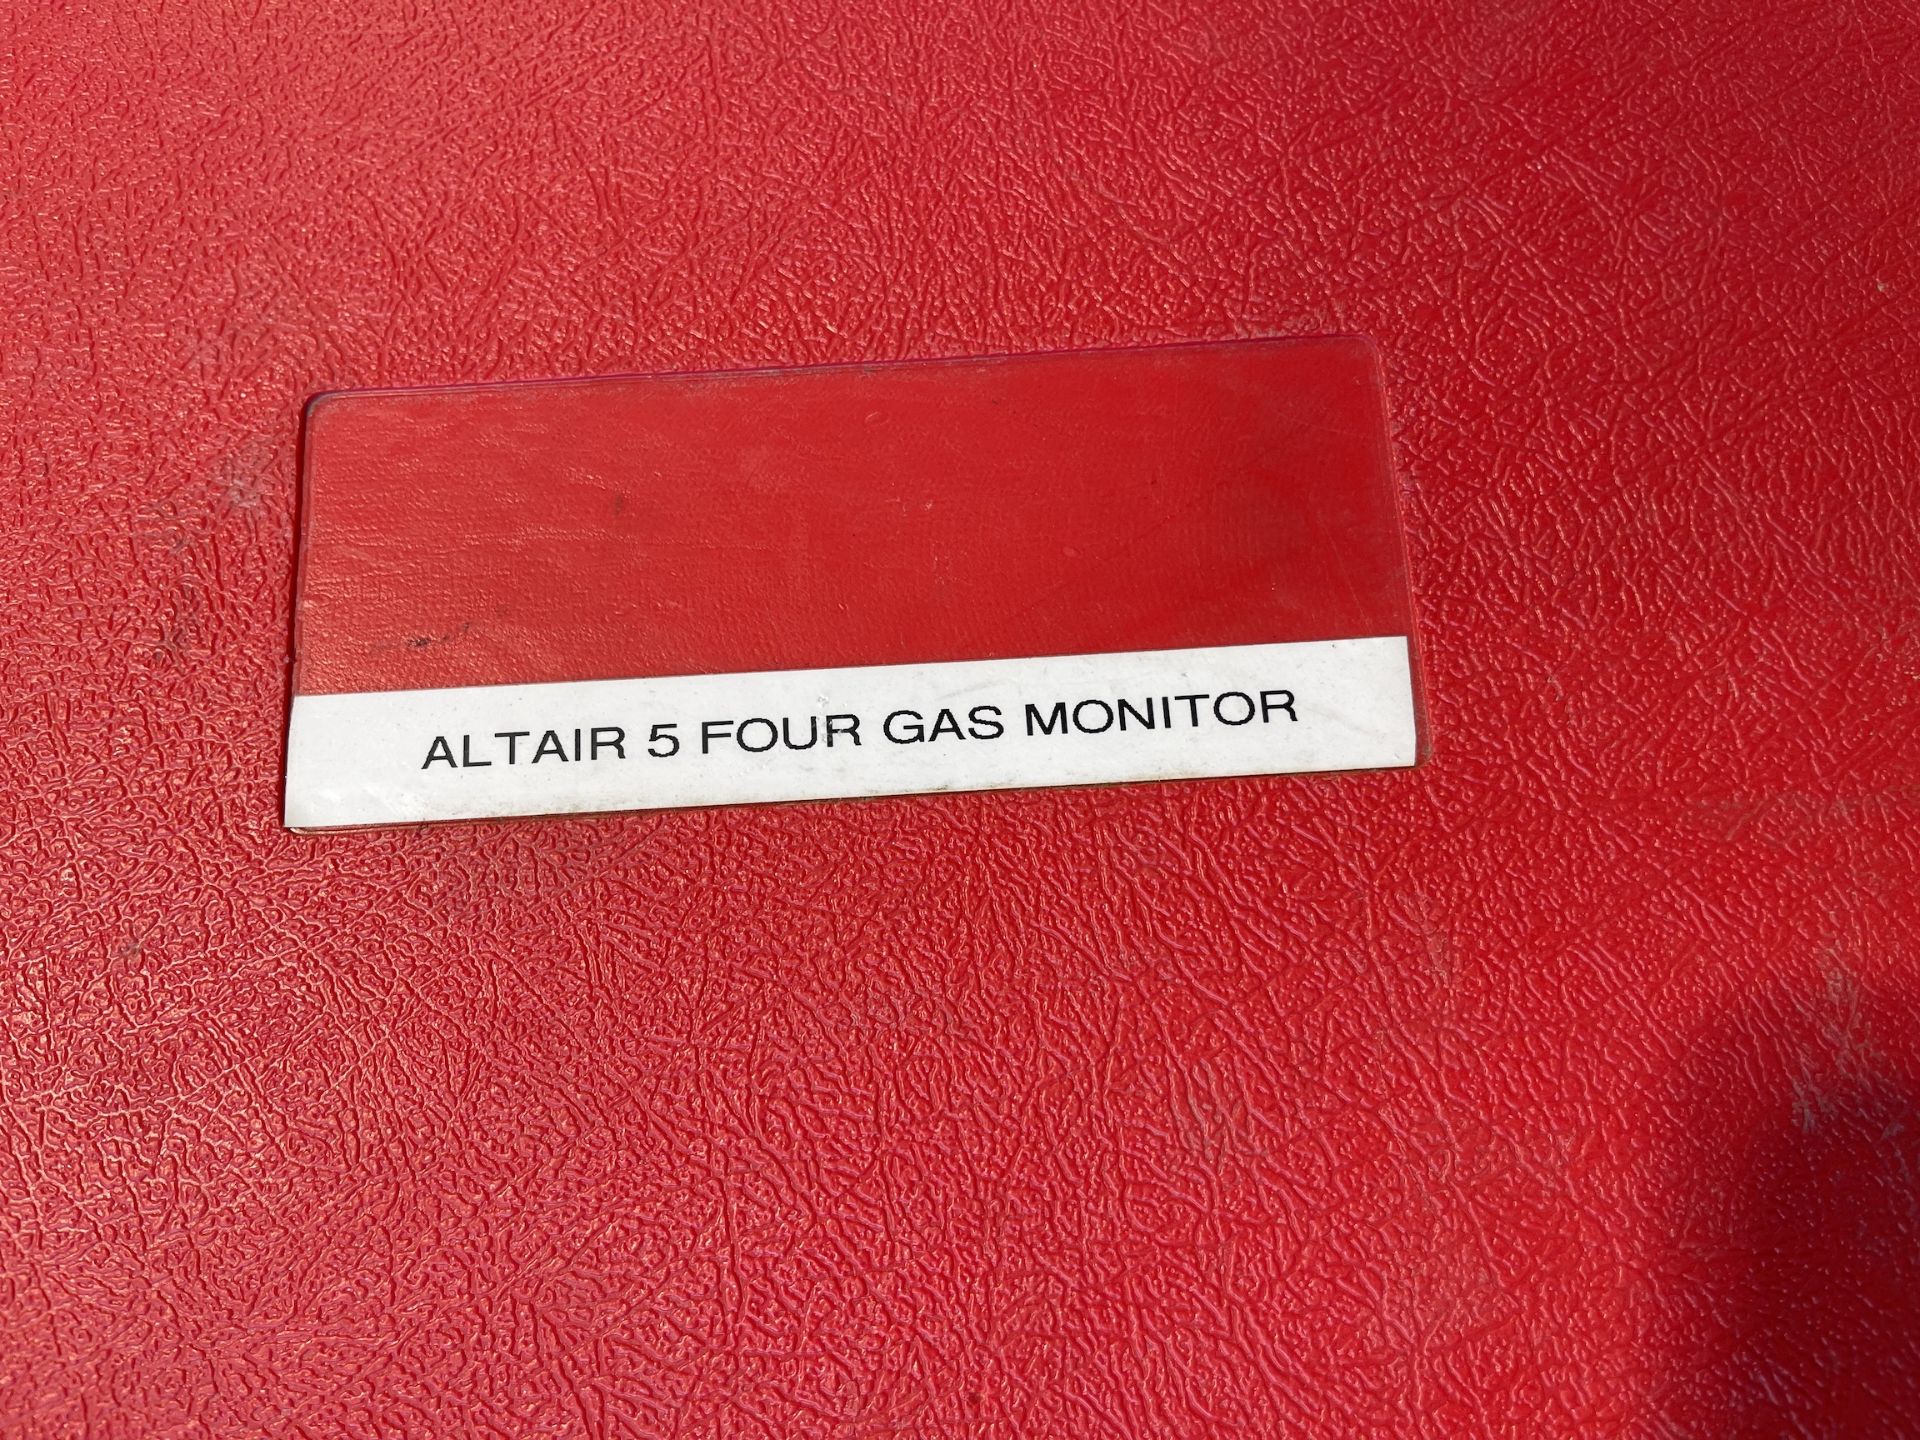 Altair 5 Four Gas Monitor - Upland - Image 6 of 8